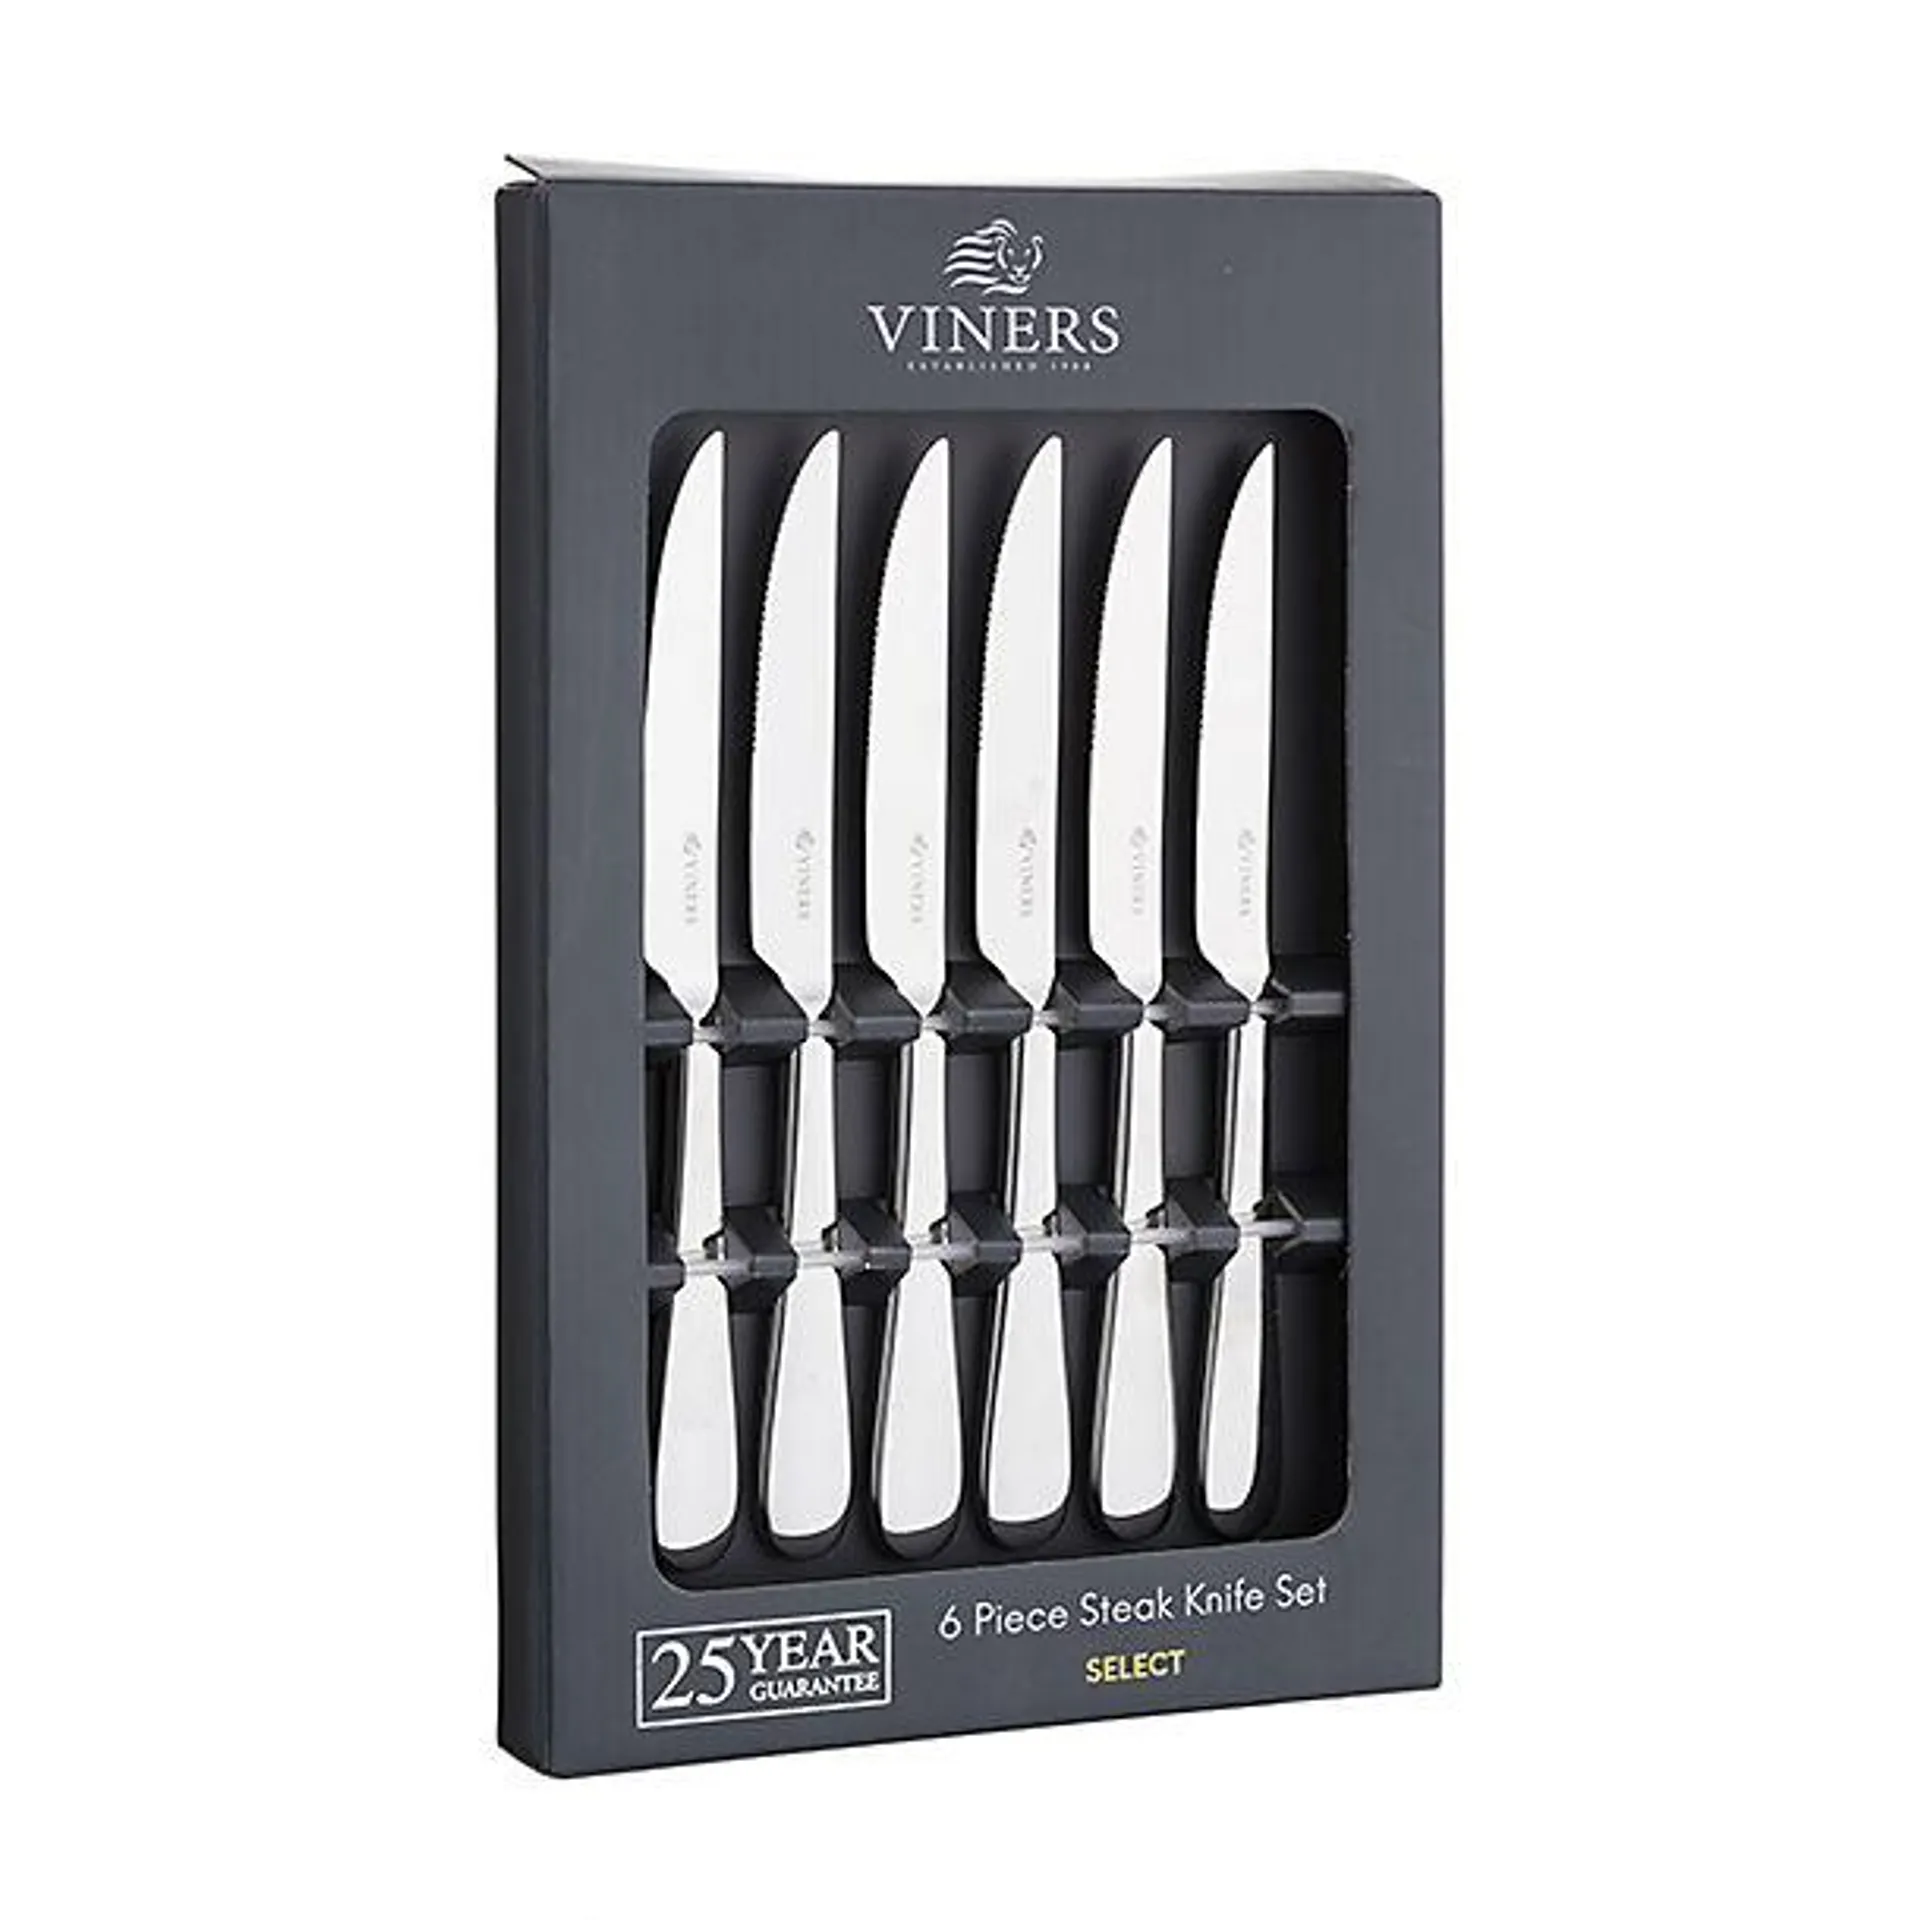 6pc Viners Select Stainless Steel Steak Knife Set